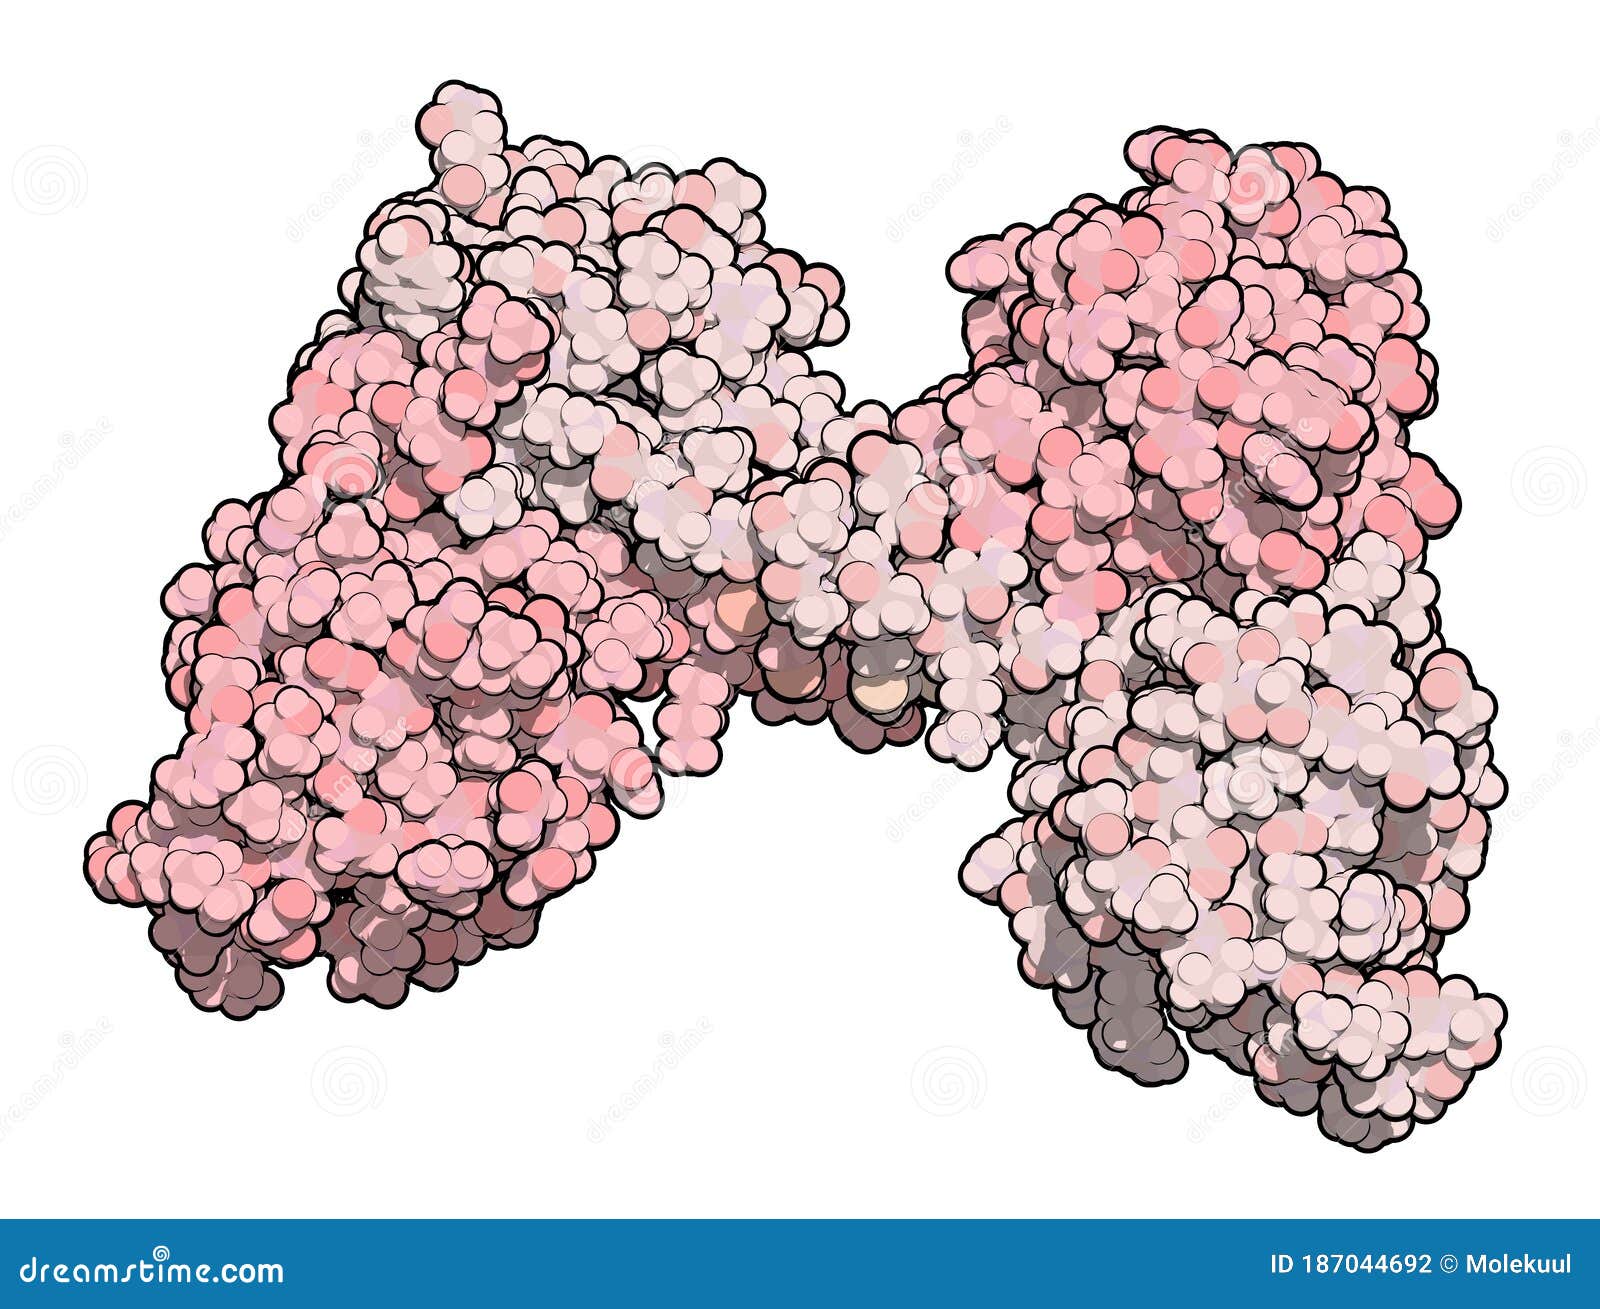 dystrophin muscle protein domain (n-terminal actin binding domain). defects cause duchenne muscular dystrophy (dmd